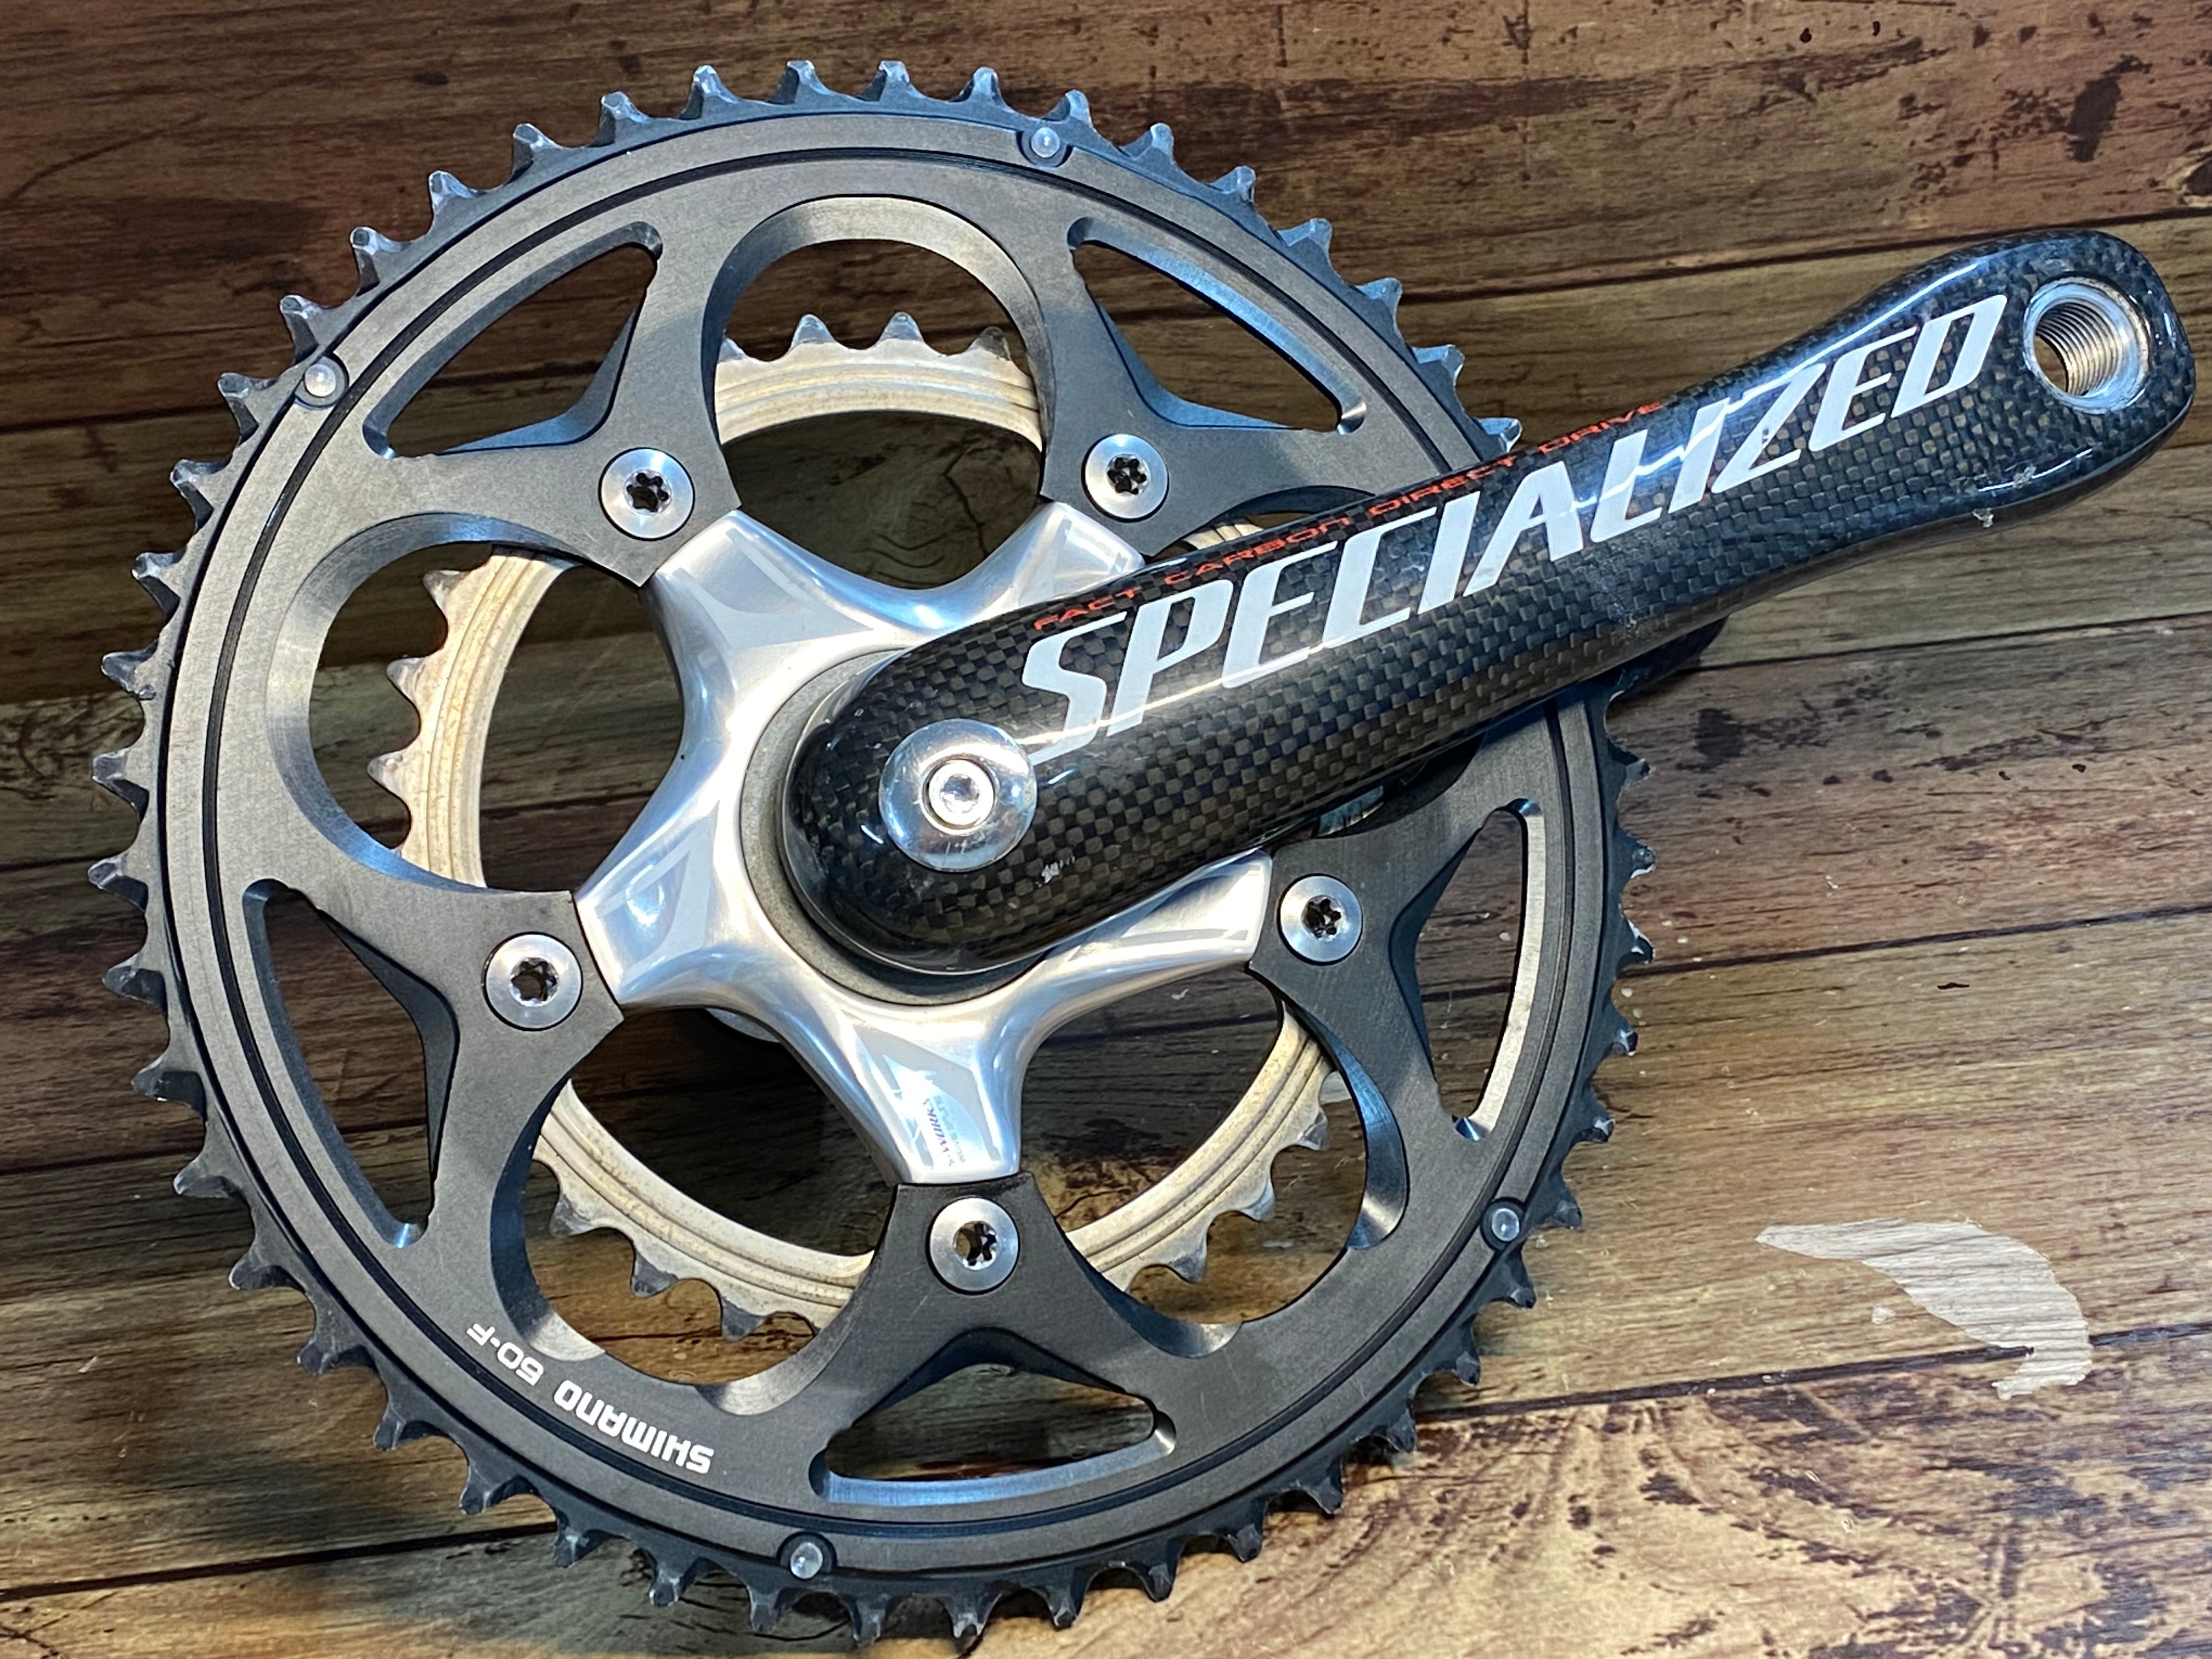 HB494 スペシャライズド SPECIALIZED カーボン クランクセット 170mm 50-34T SHIMANO アウターチェーンリング